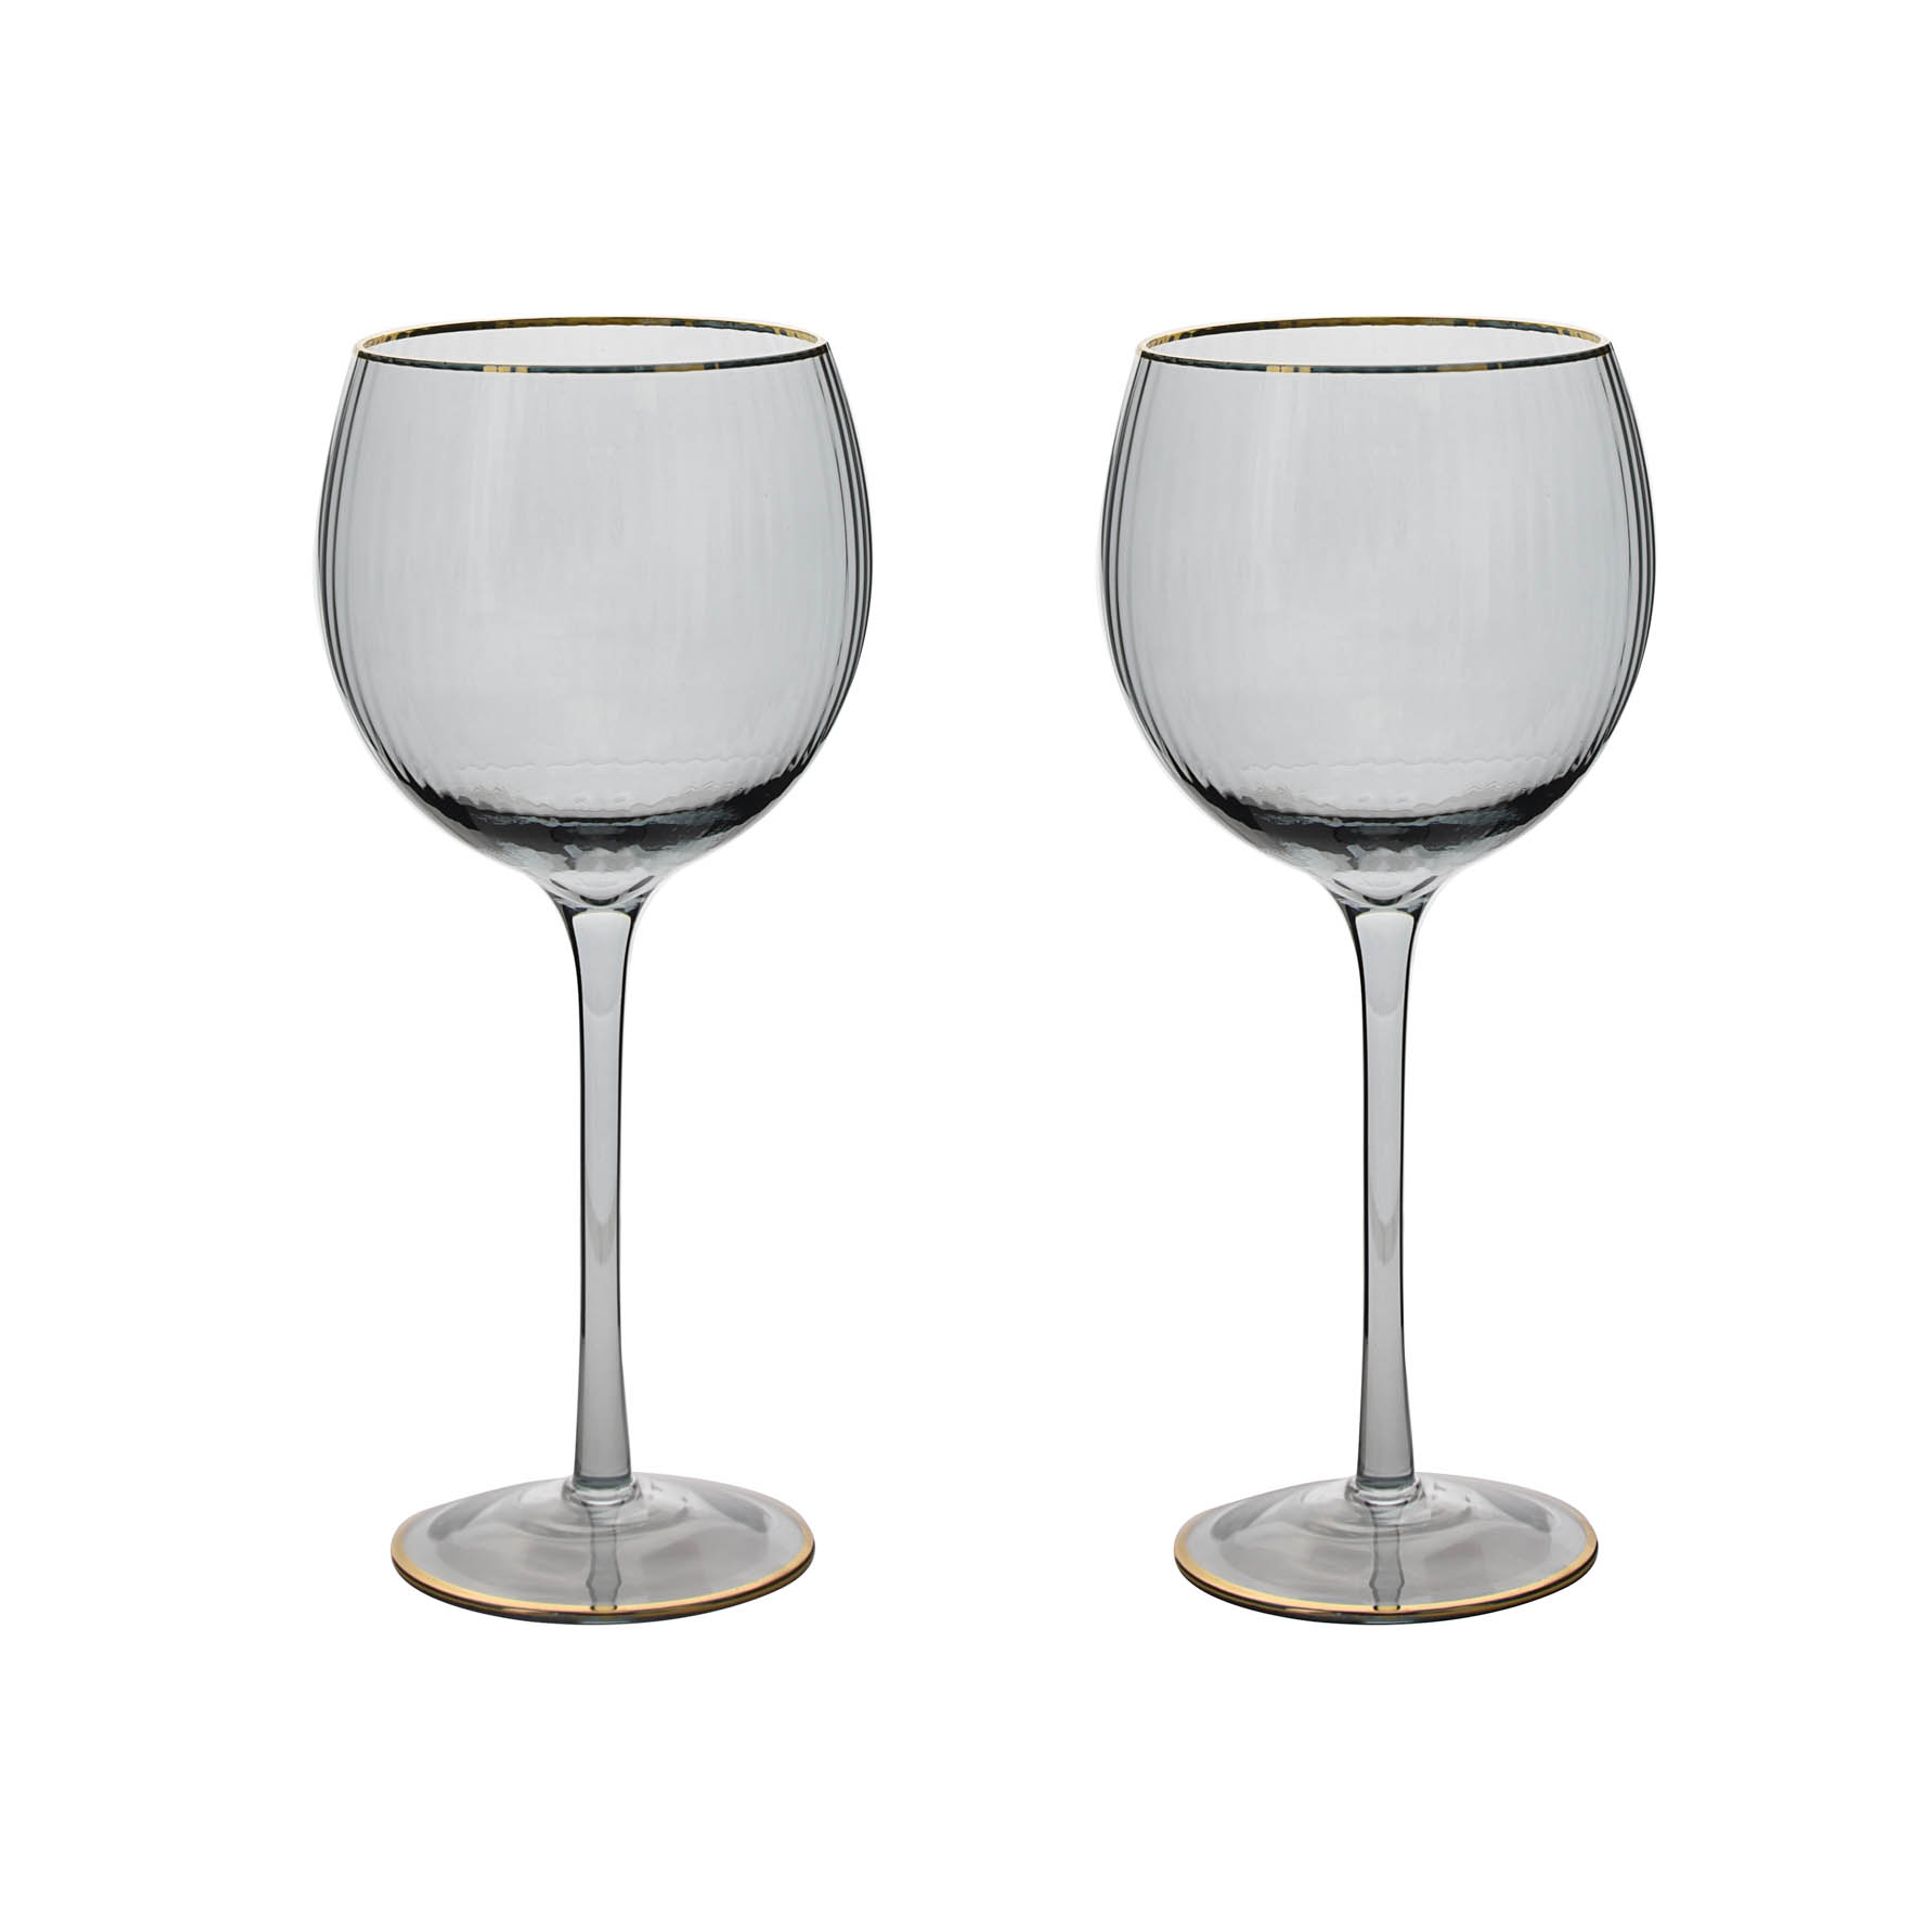 &Quirky Set of 2 Grey Gin Glasses with Gold Rim